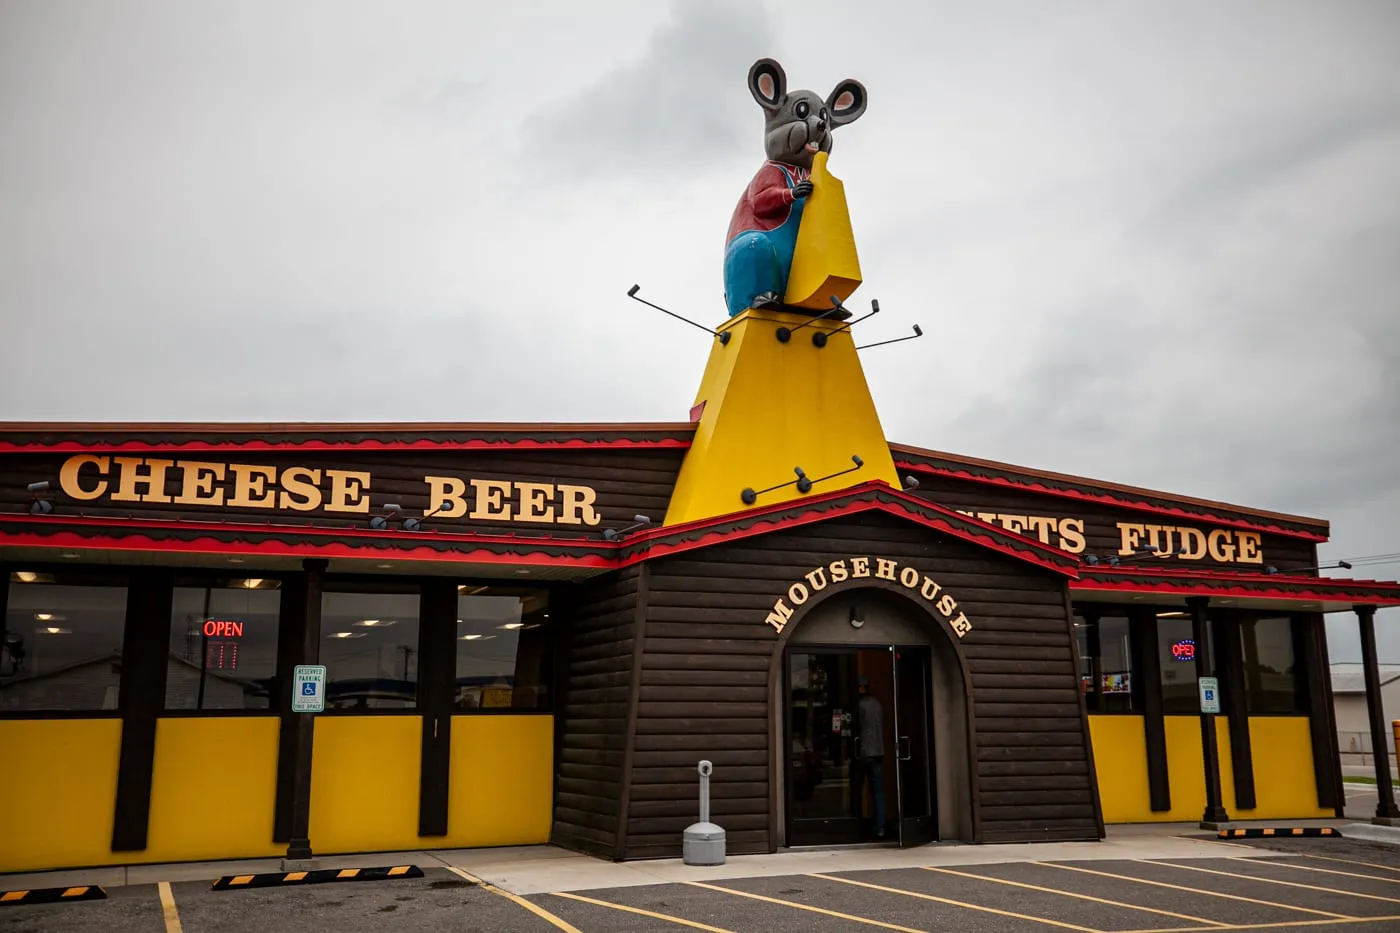 Giant Mouse at Mousehouse Cheesehaus in Windsor, Wisconsin | Cheese Shop in Wisconsin | Wisconsin Roadside Attractions